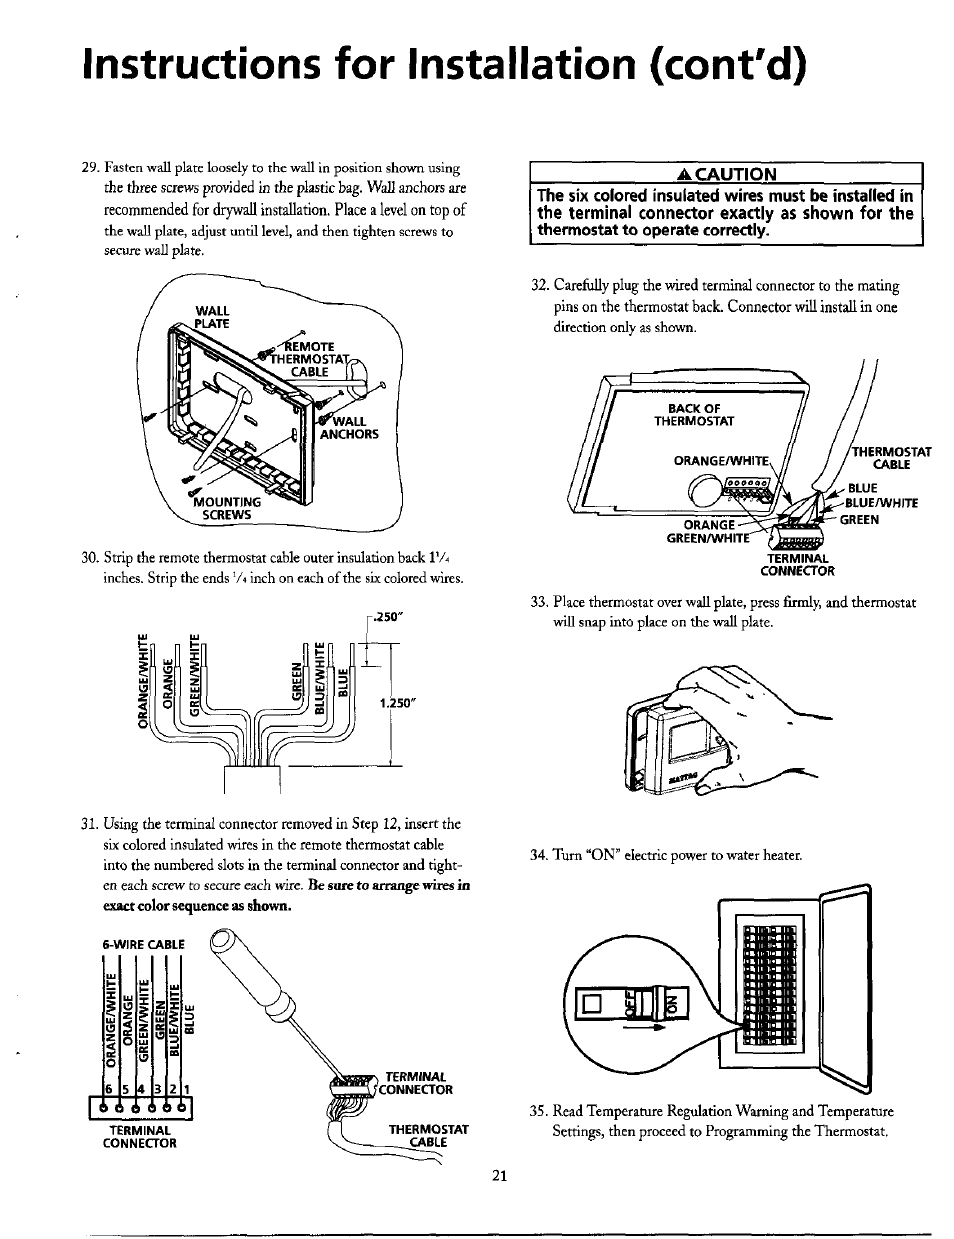 Instructions for installation (cont'd) | Maytag HE21250PC User Manual | Page 21 / 40